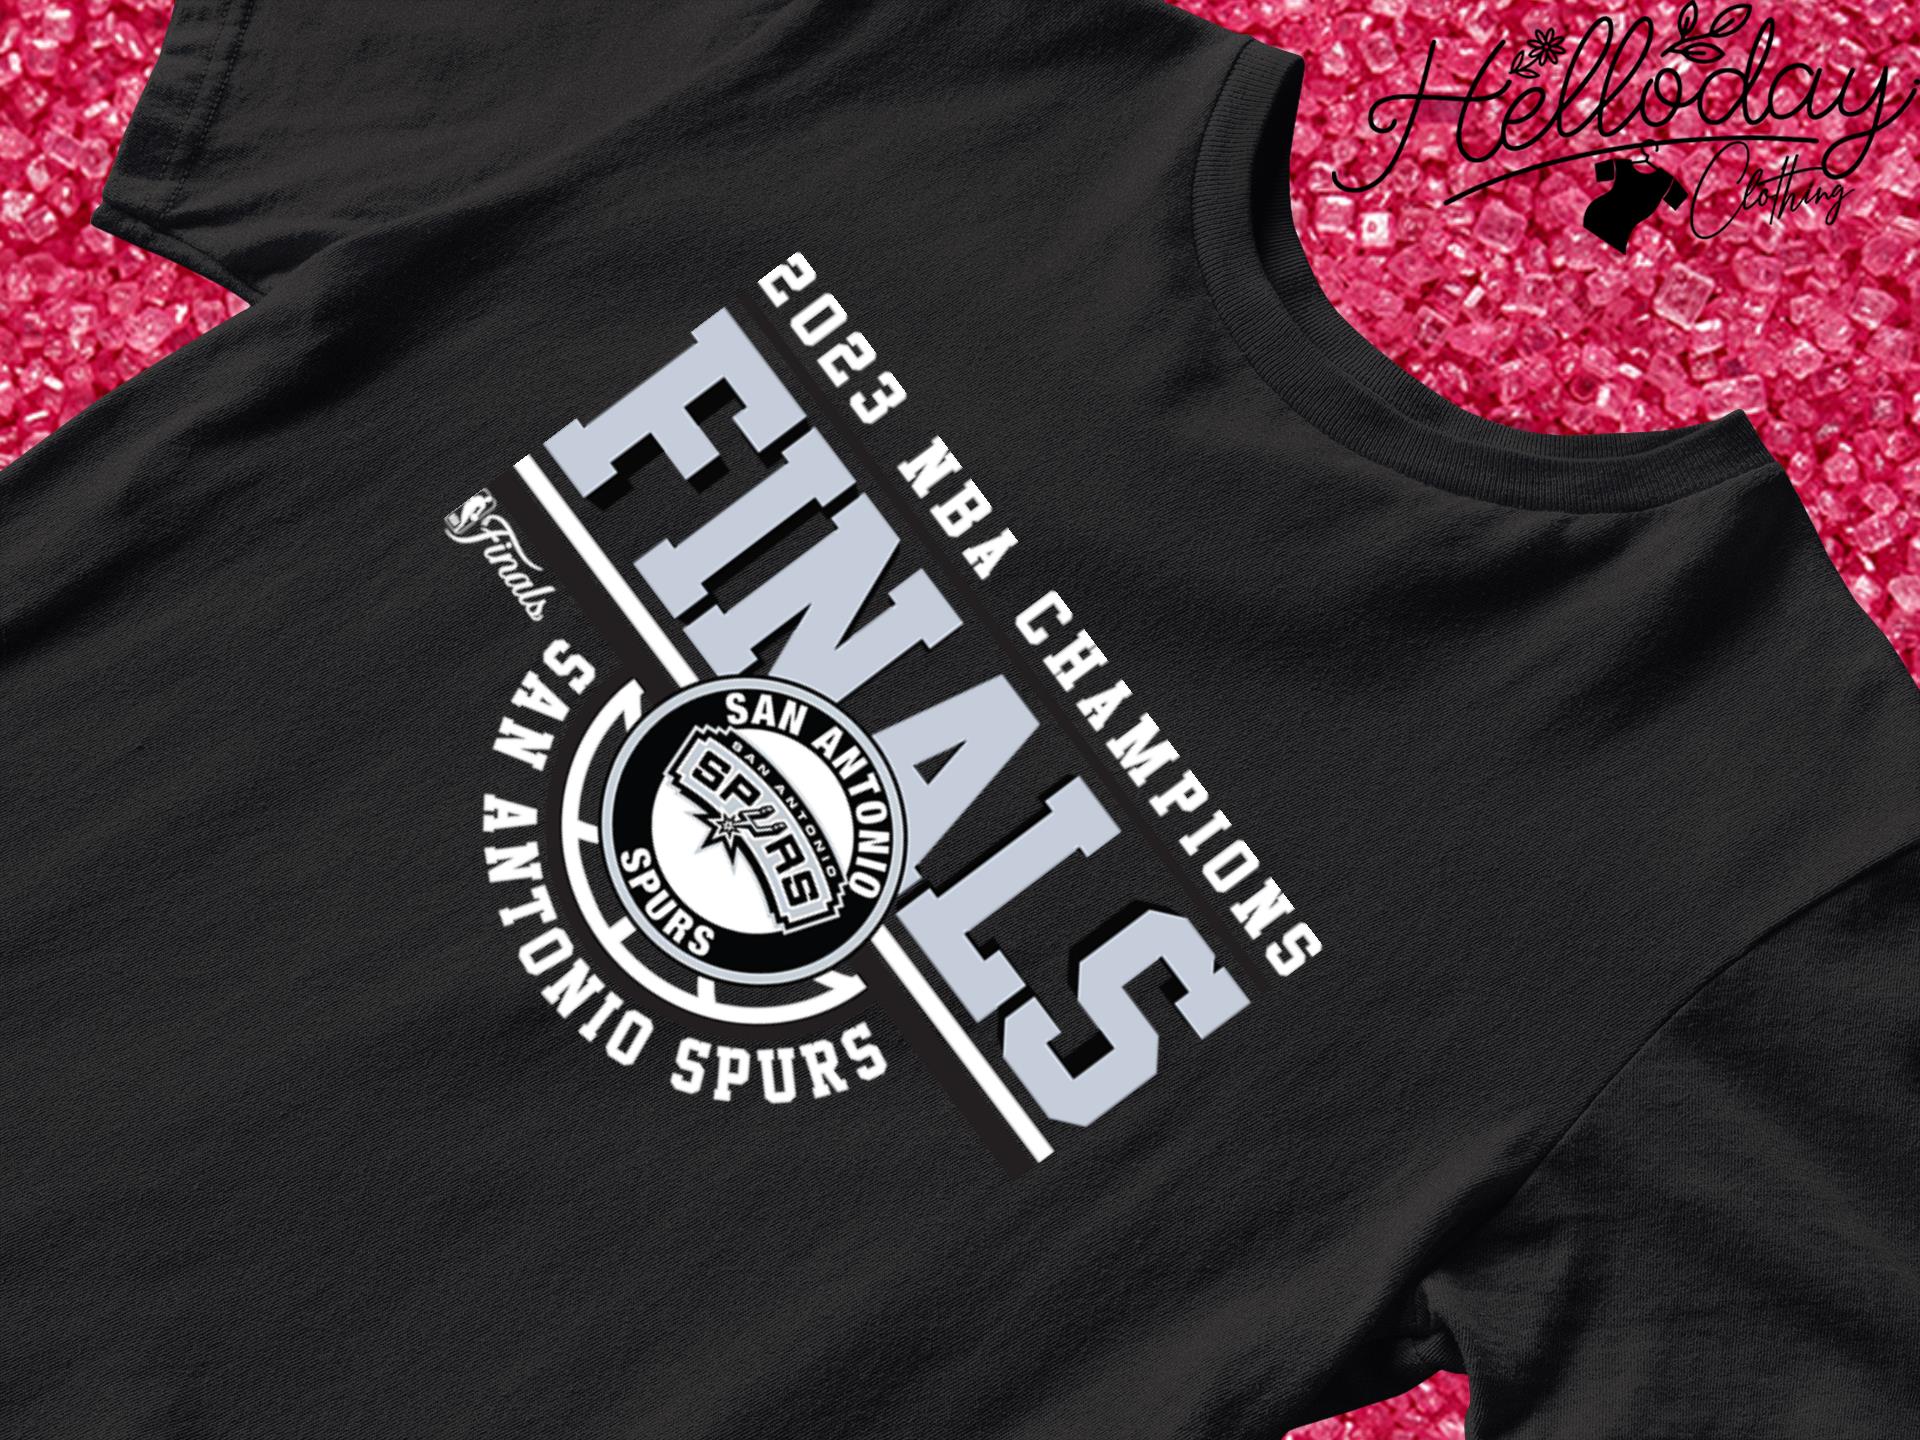 2023 NBA Finals Champions San Antonio Spurs t-shirt by To-Tee Clothing -  Issuu